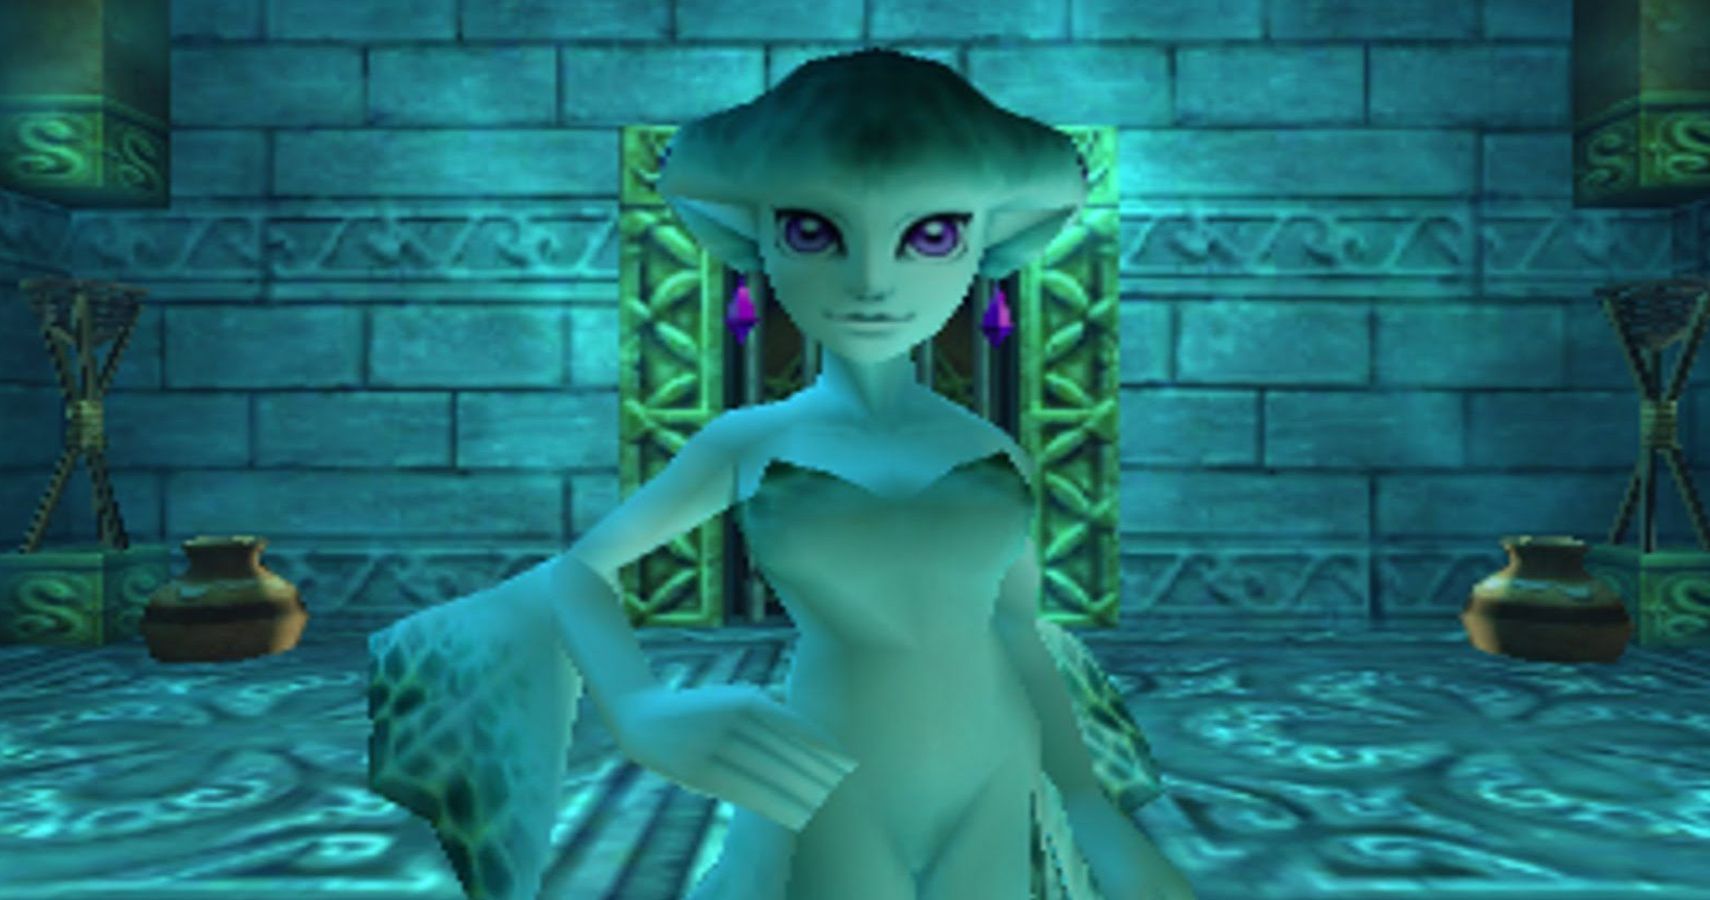 What are the changes made in Ocarina of Time's Master Quest?